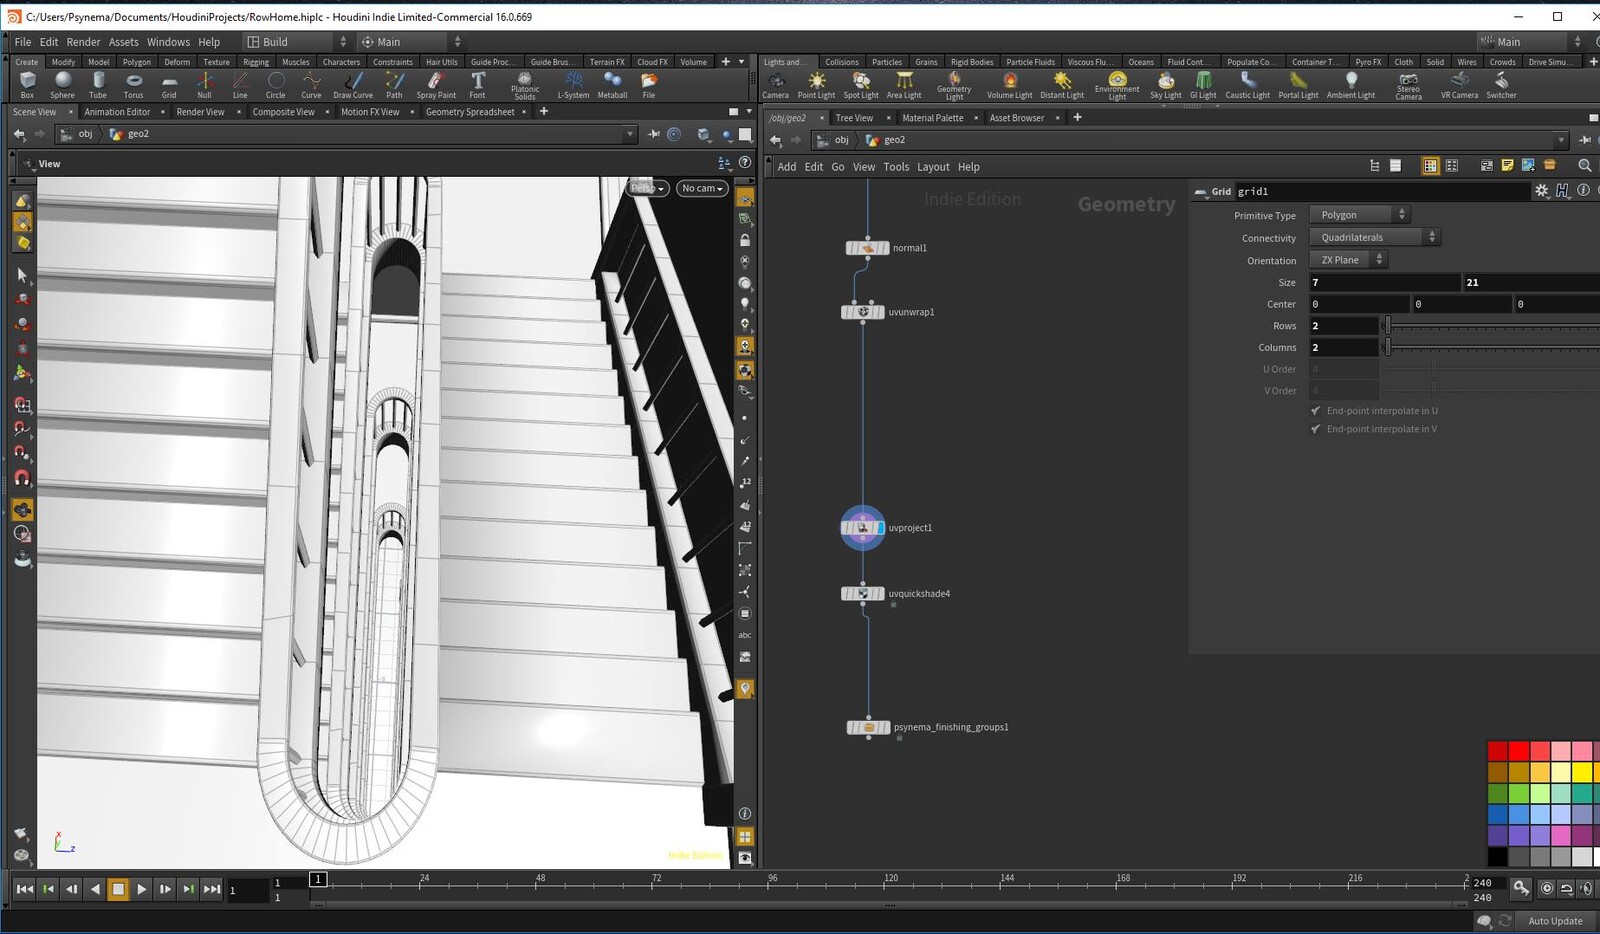 And HDA for stairways made for the innards in Houdini